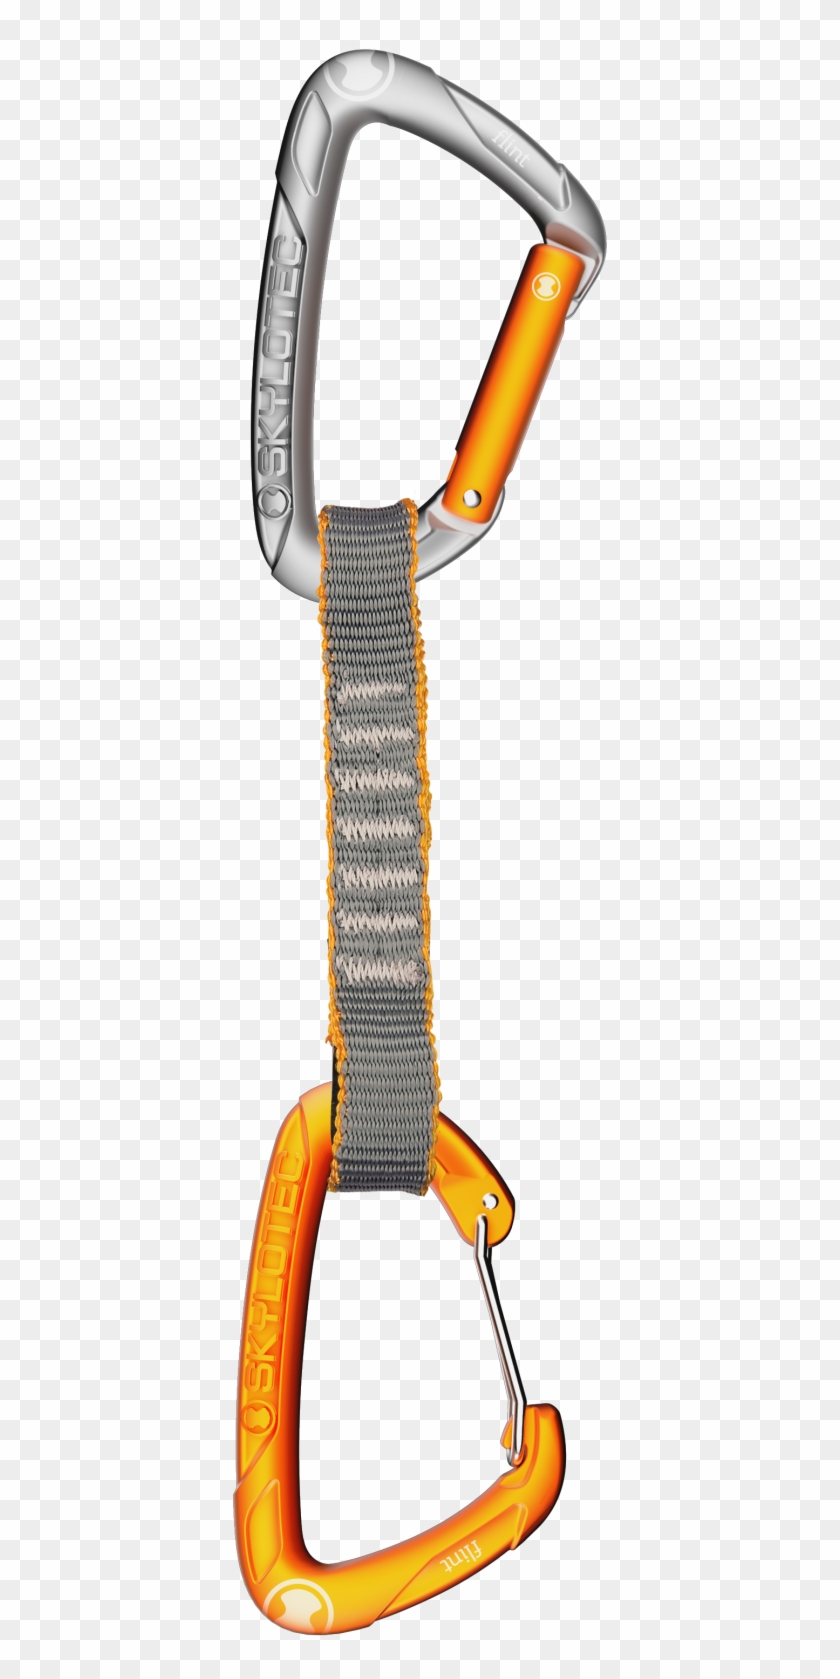 Flint Express Mixed Quickdraws With A Full Gate Carabiner - Belay Device Clipart #5154252